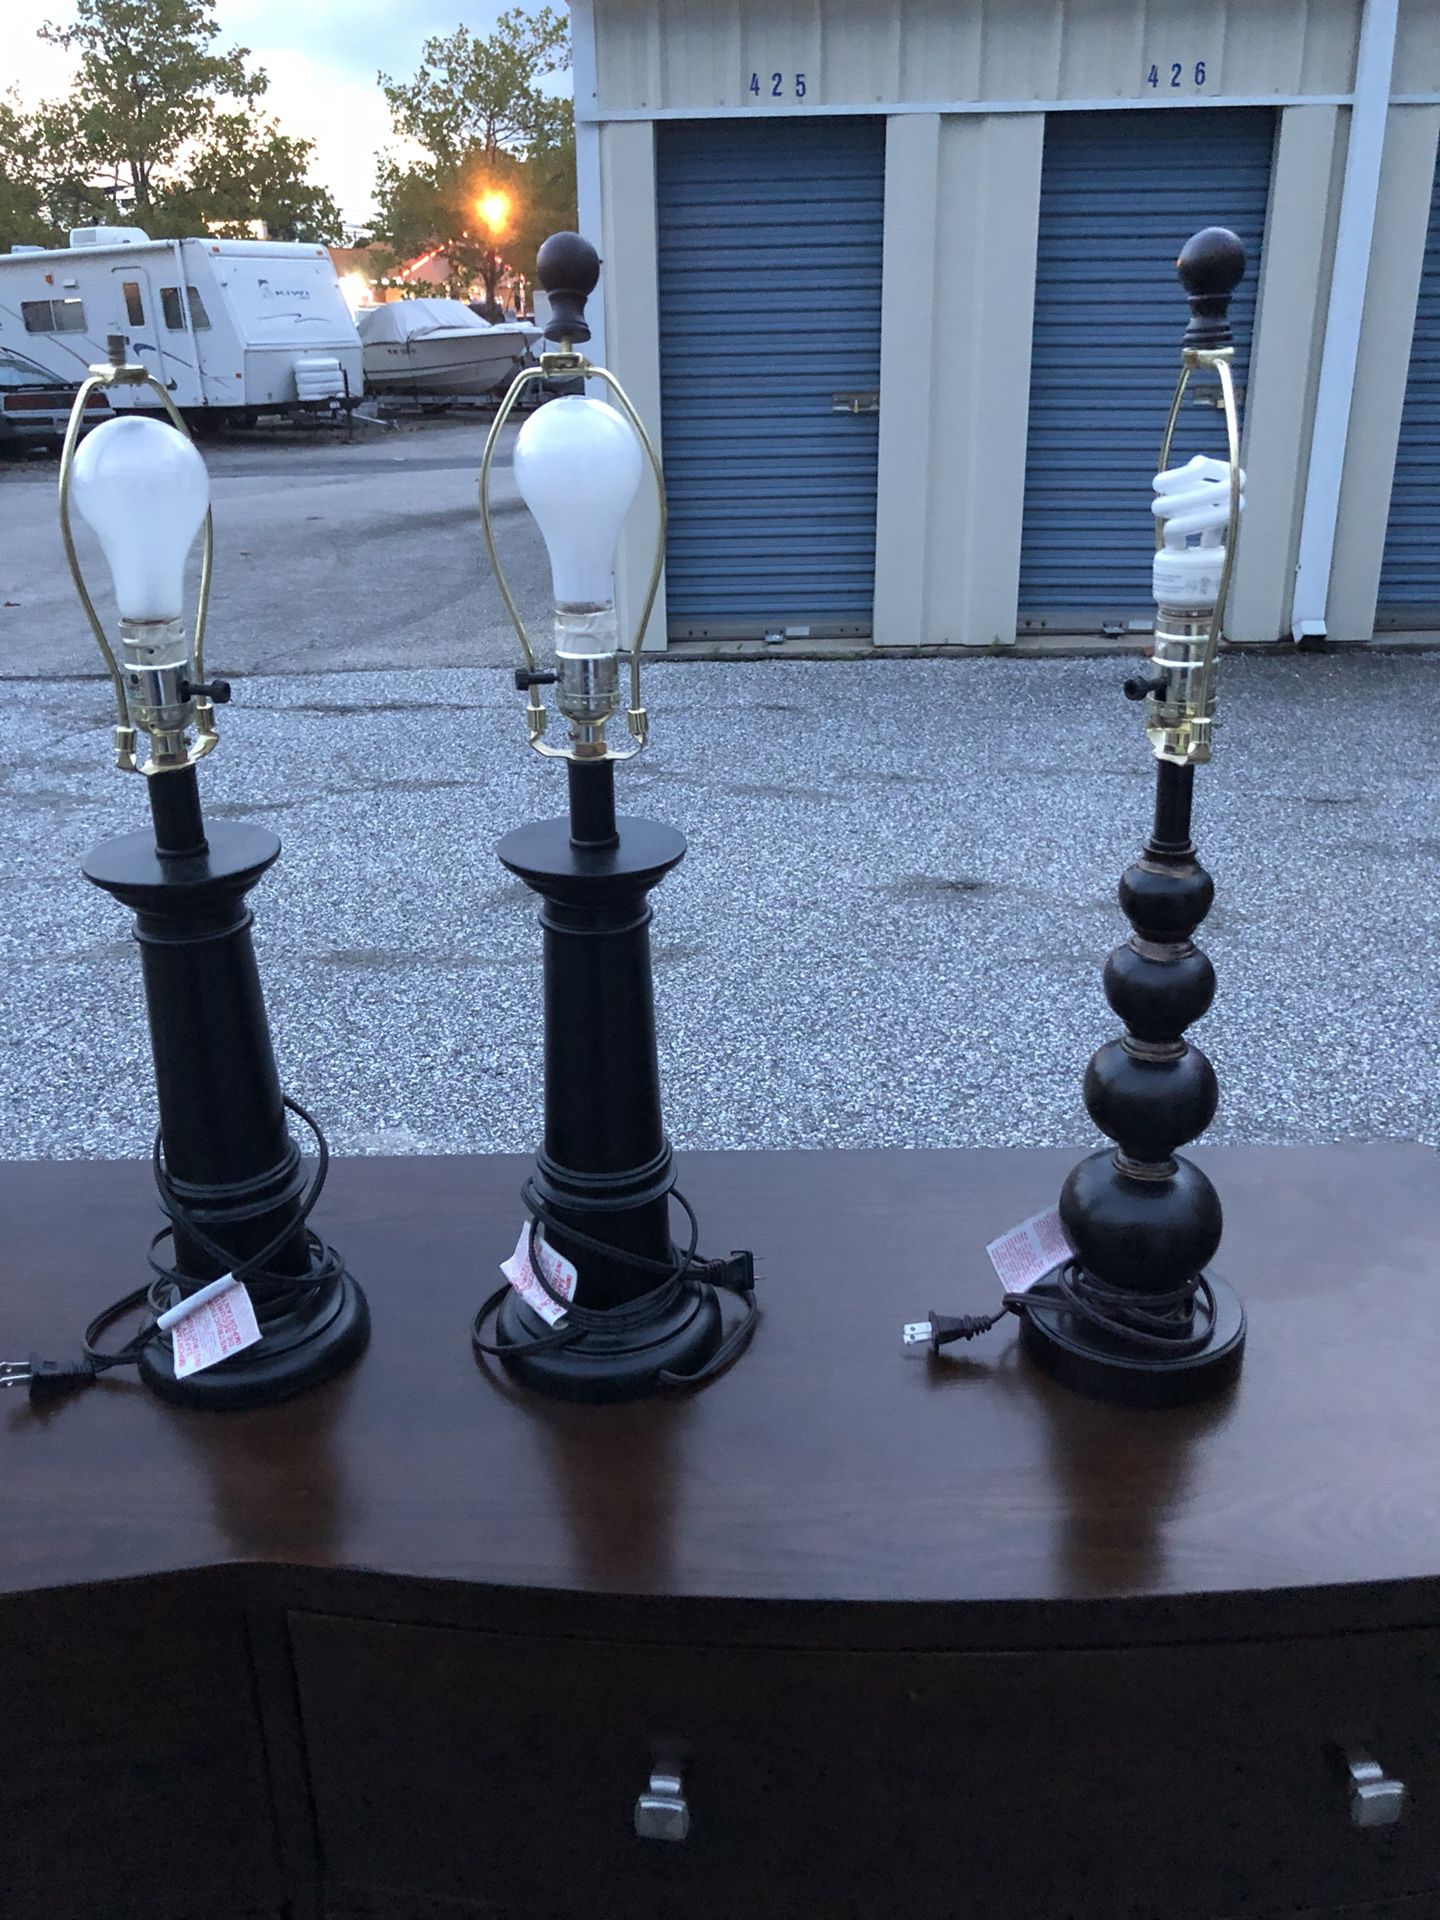 3 lamps with round shades.